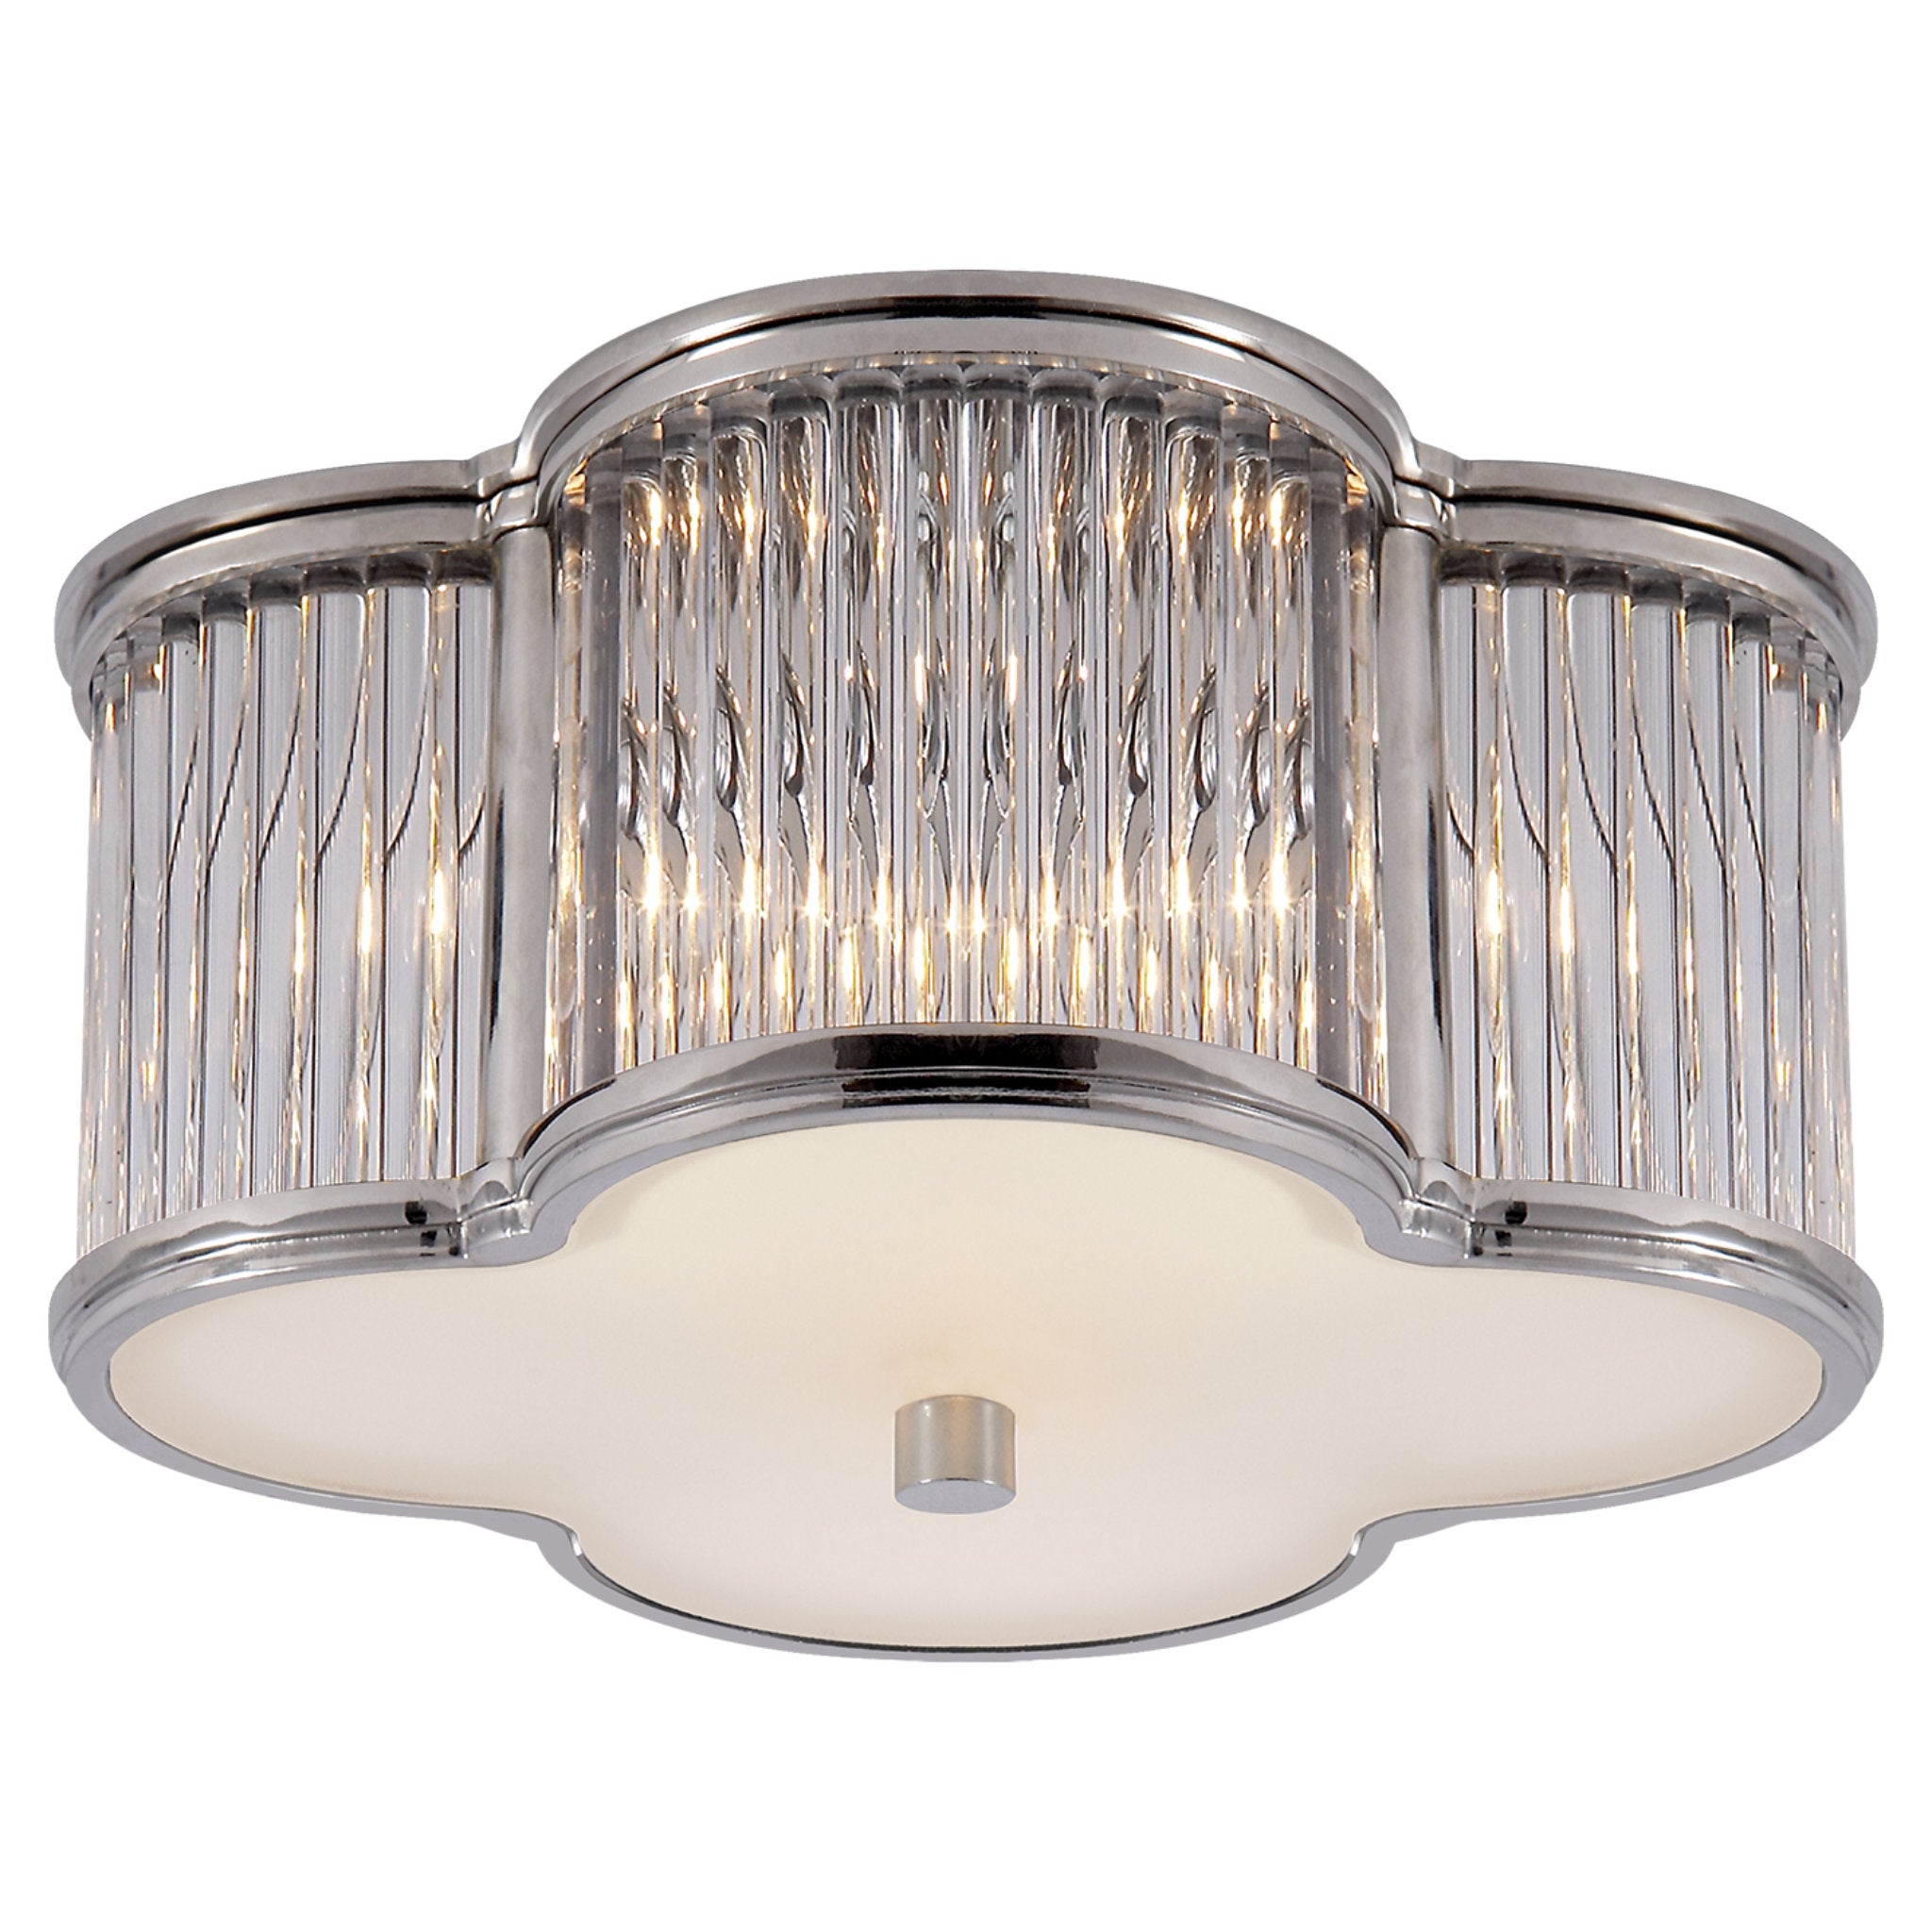 Alexa Hampton Basil Small Flush Mount in Polished Nickel and Clear Glass Rods with Frosted Glass